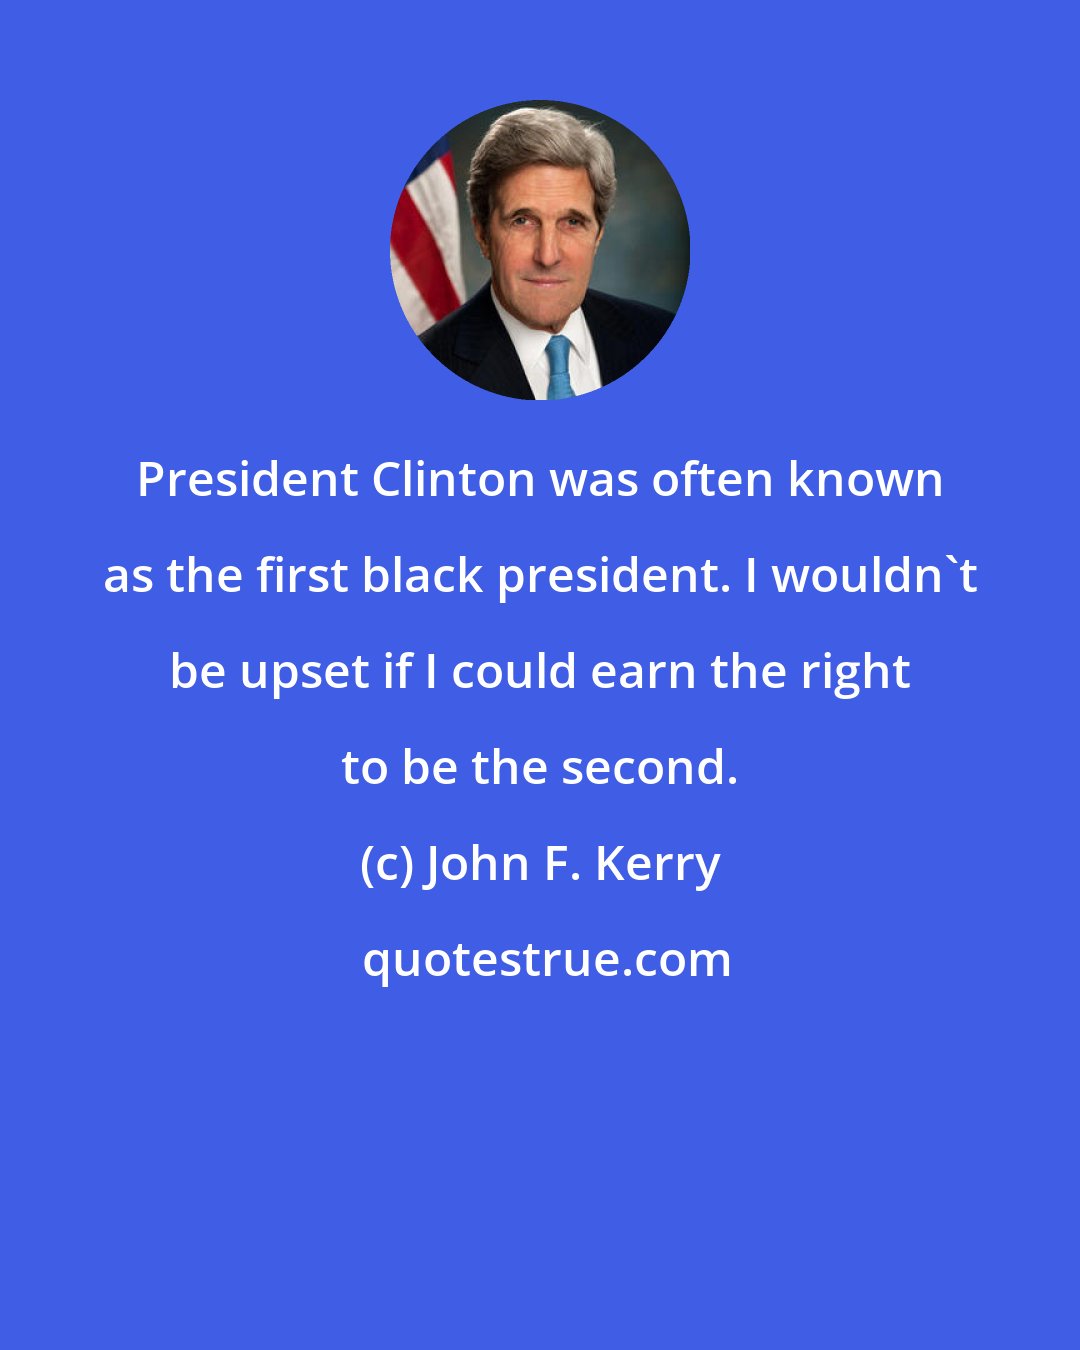 John F. Kerry: President Clinton was often known as the first black president. I wouldn't be upset if I could earn the right to be the second.